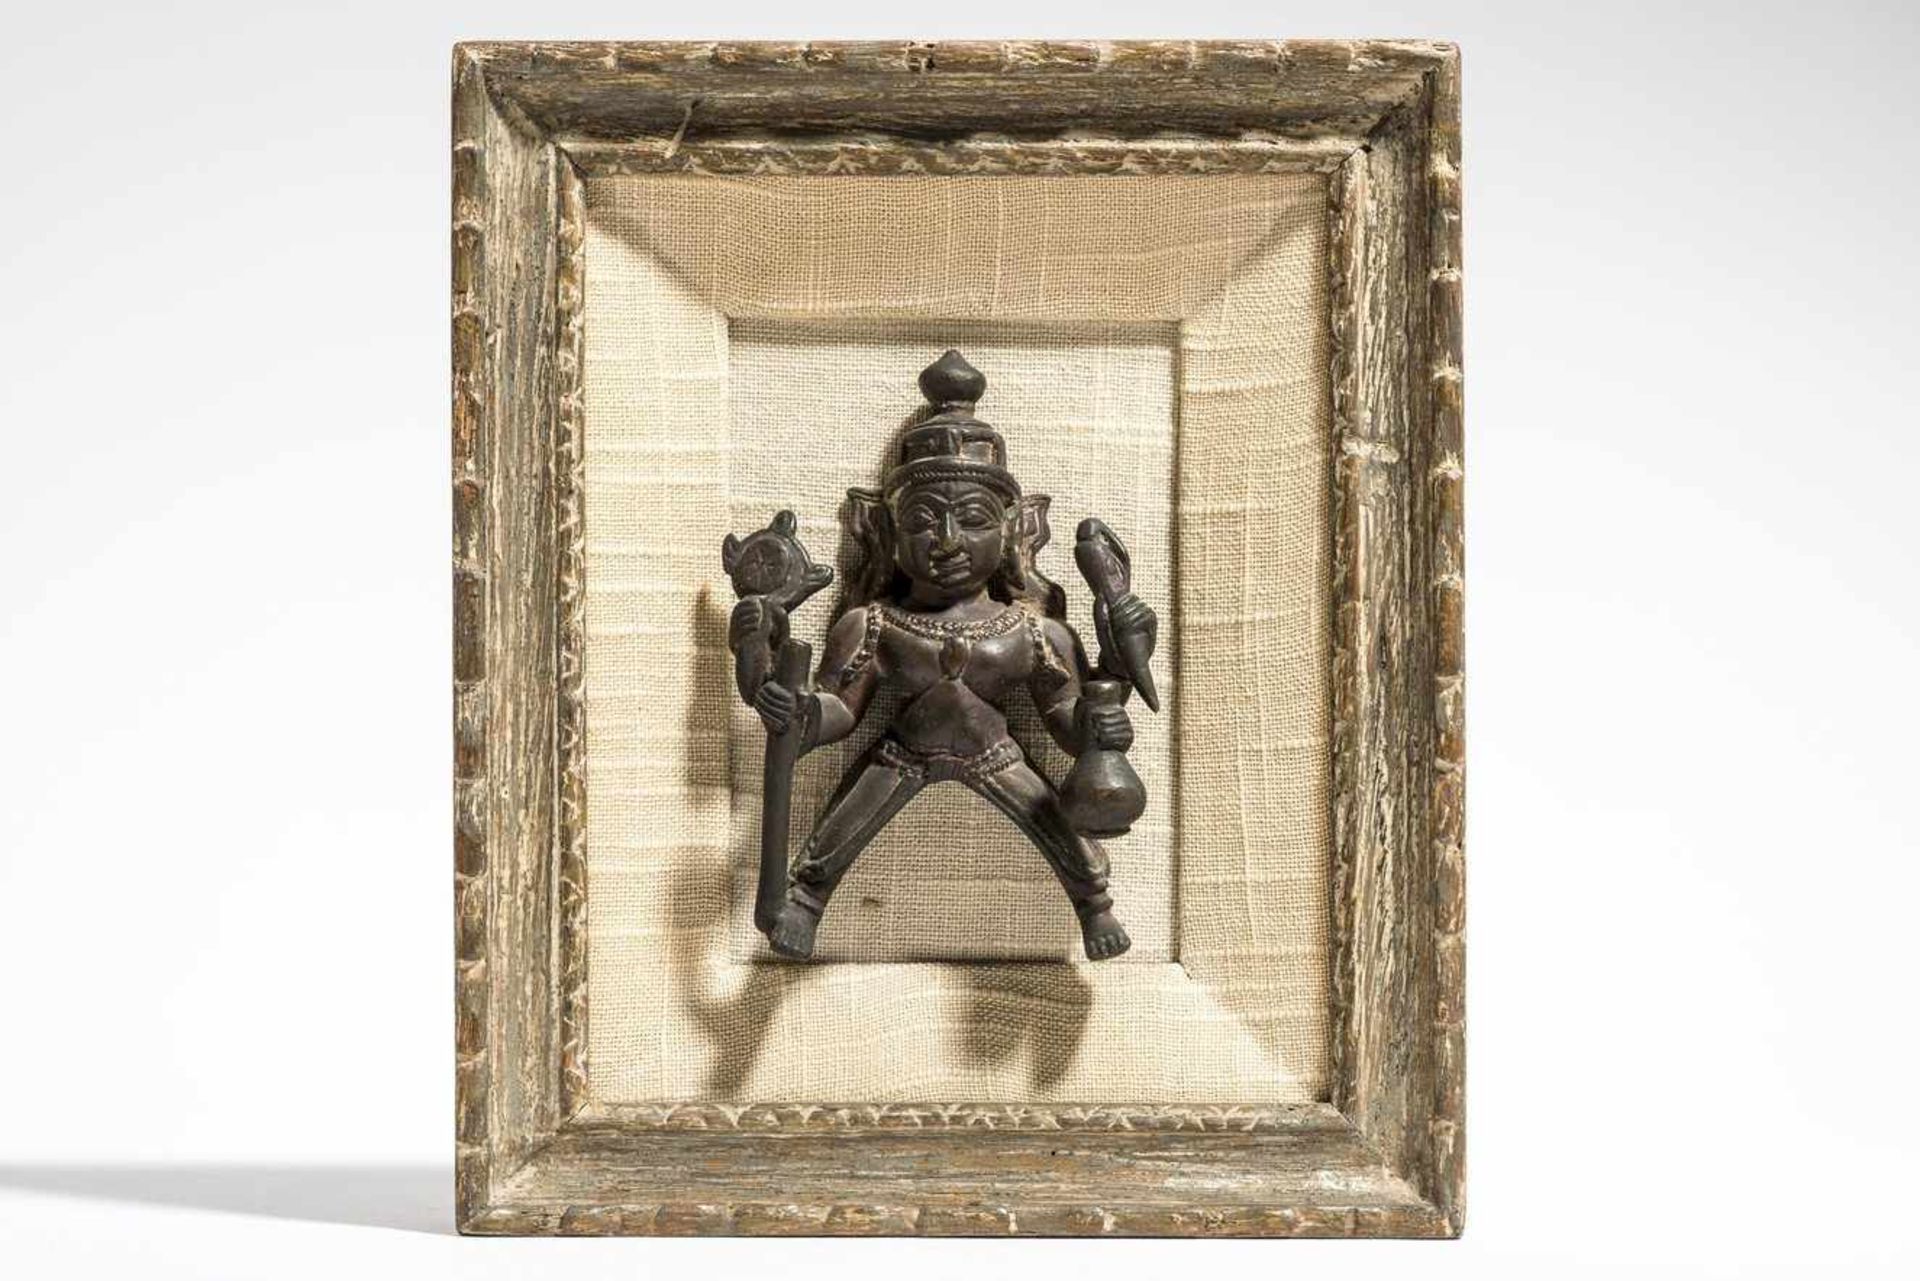 GOD VISHNU Bronze. India, approx. 18th to 19th cent. Small cult bronze, neatly affixed within a